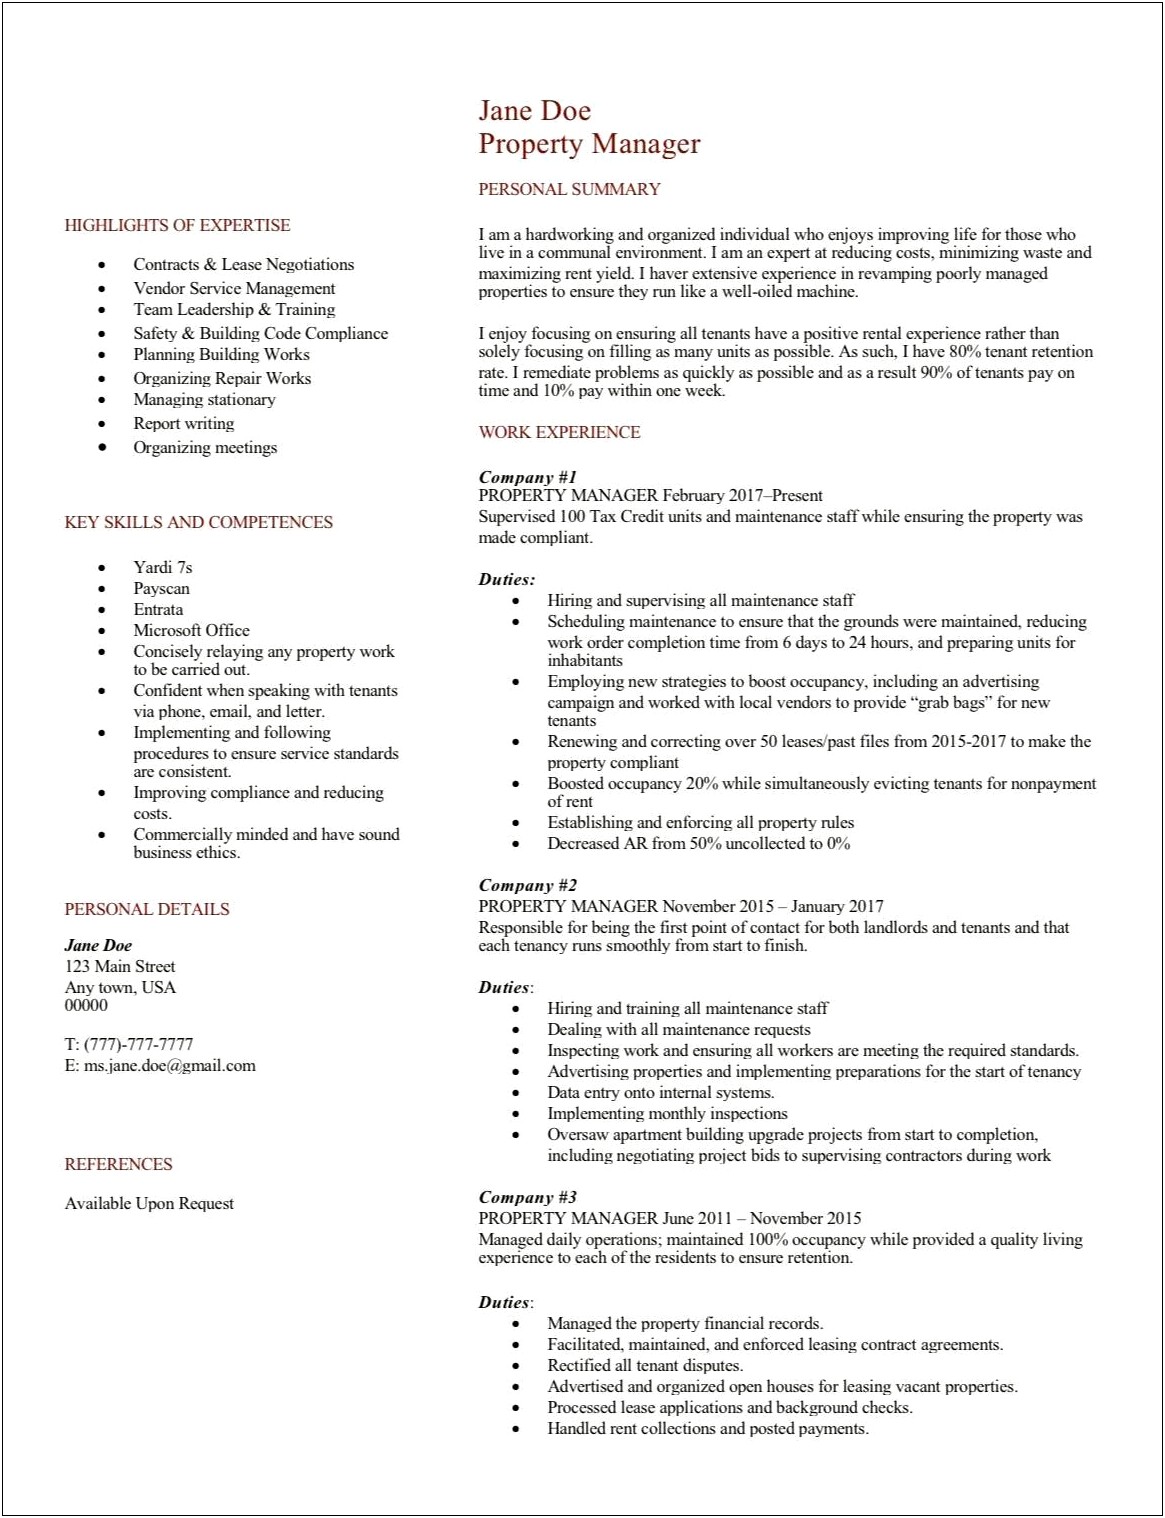 Resume For Property Manager No Experience